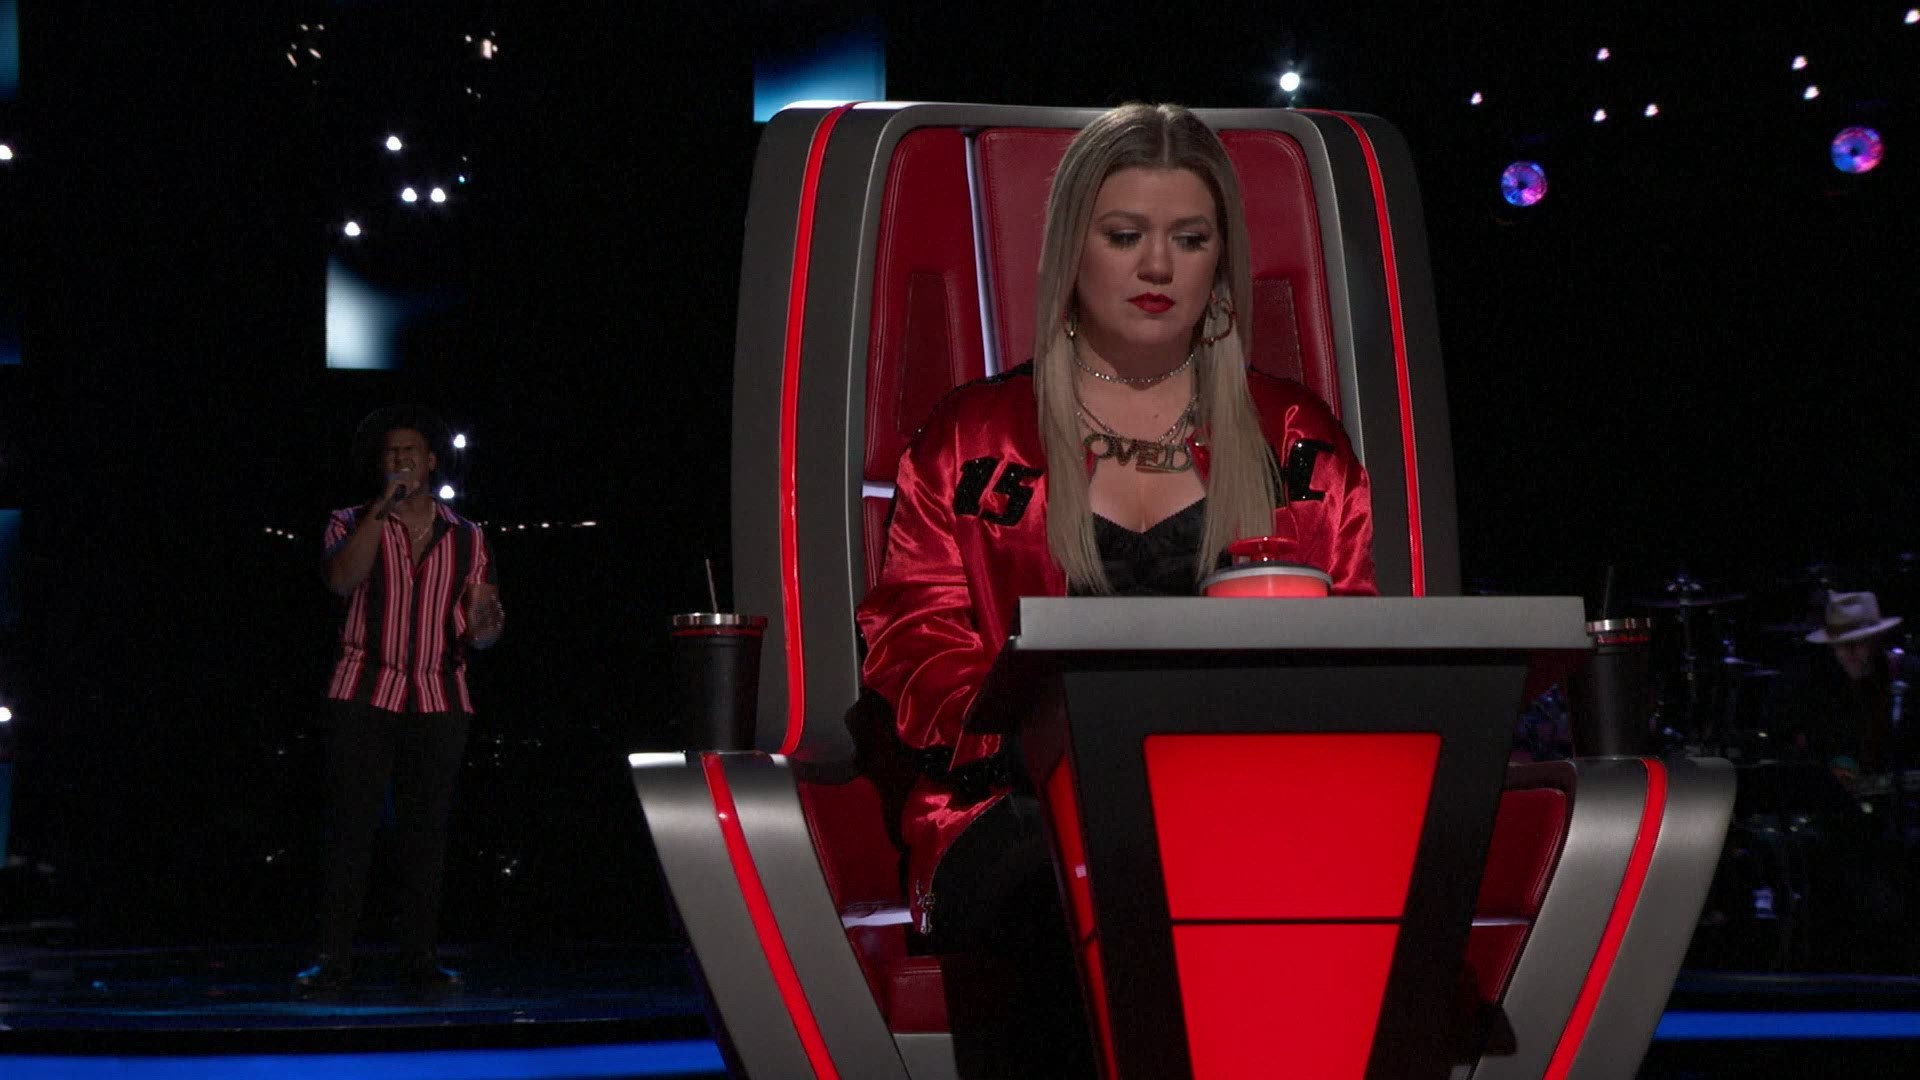 Deandre Nico gets a four chair turn on The Voice